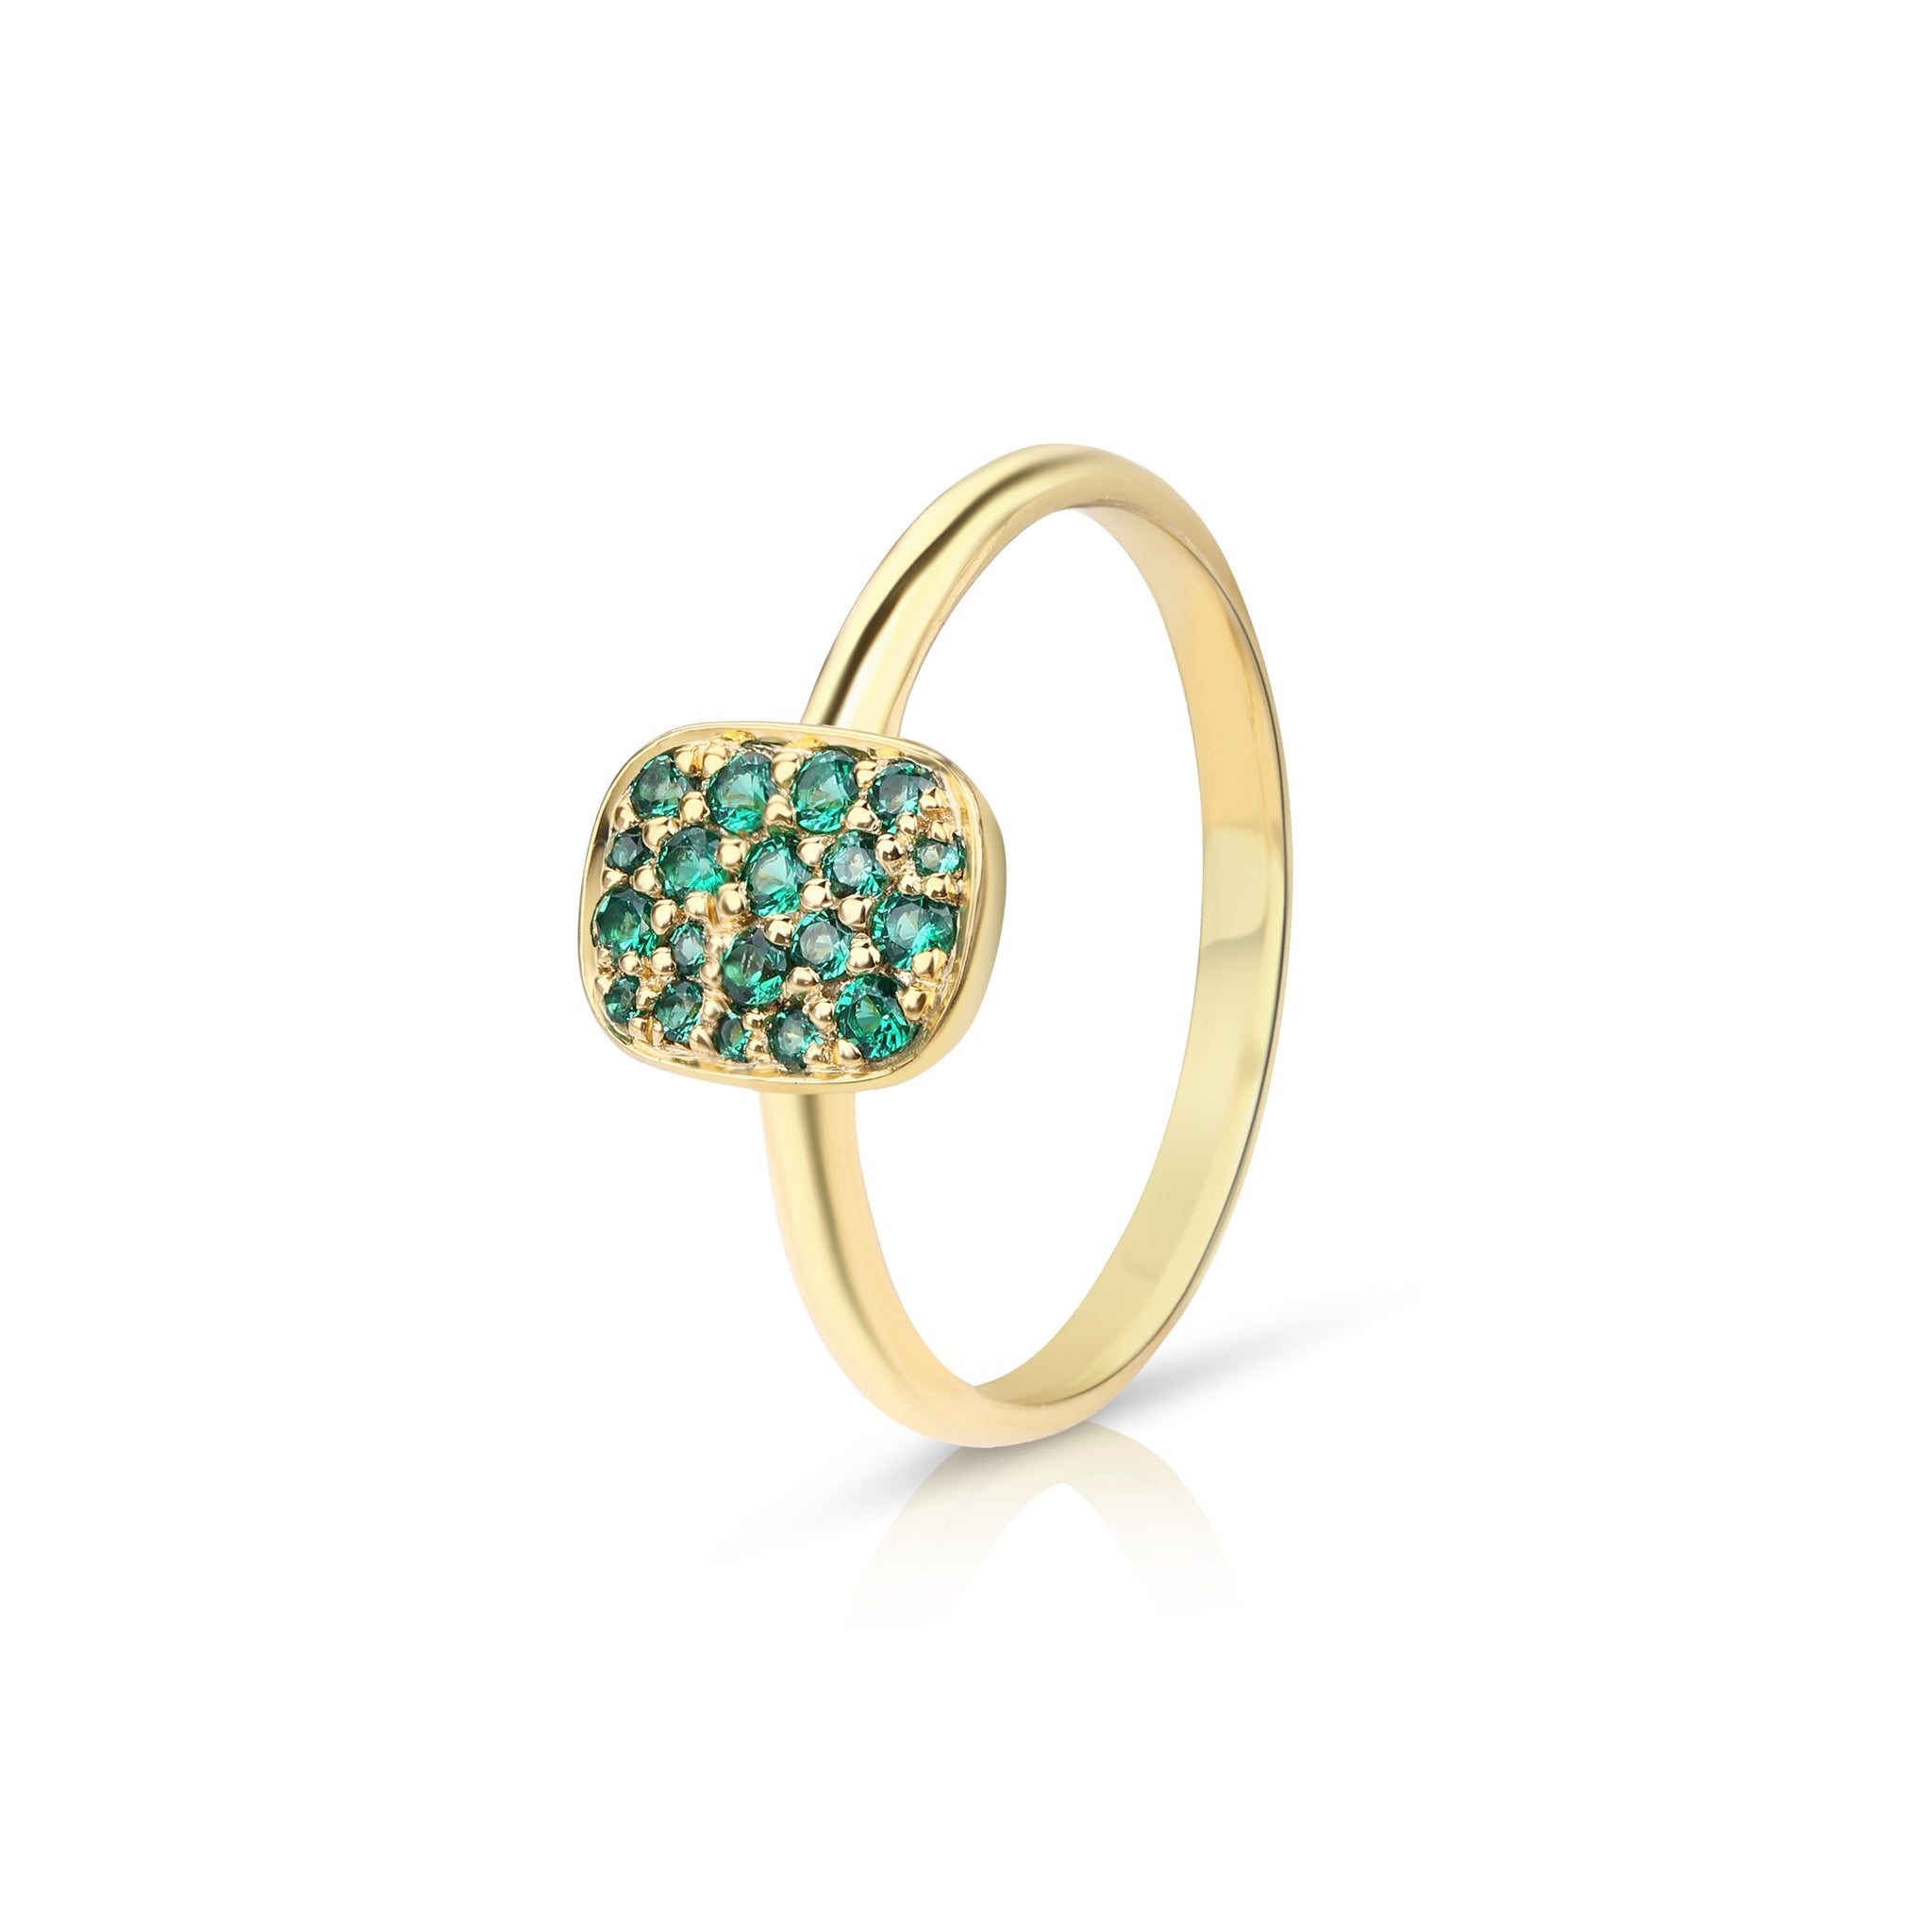 The Show Stopper Ring - Emerald